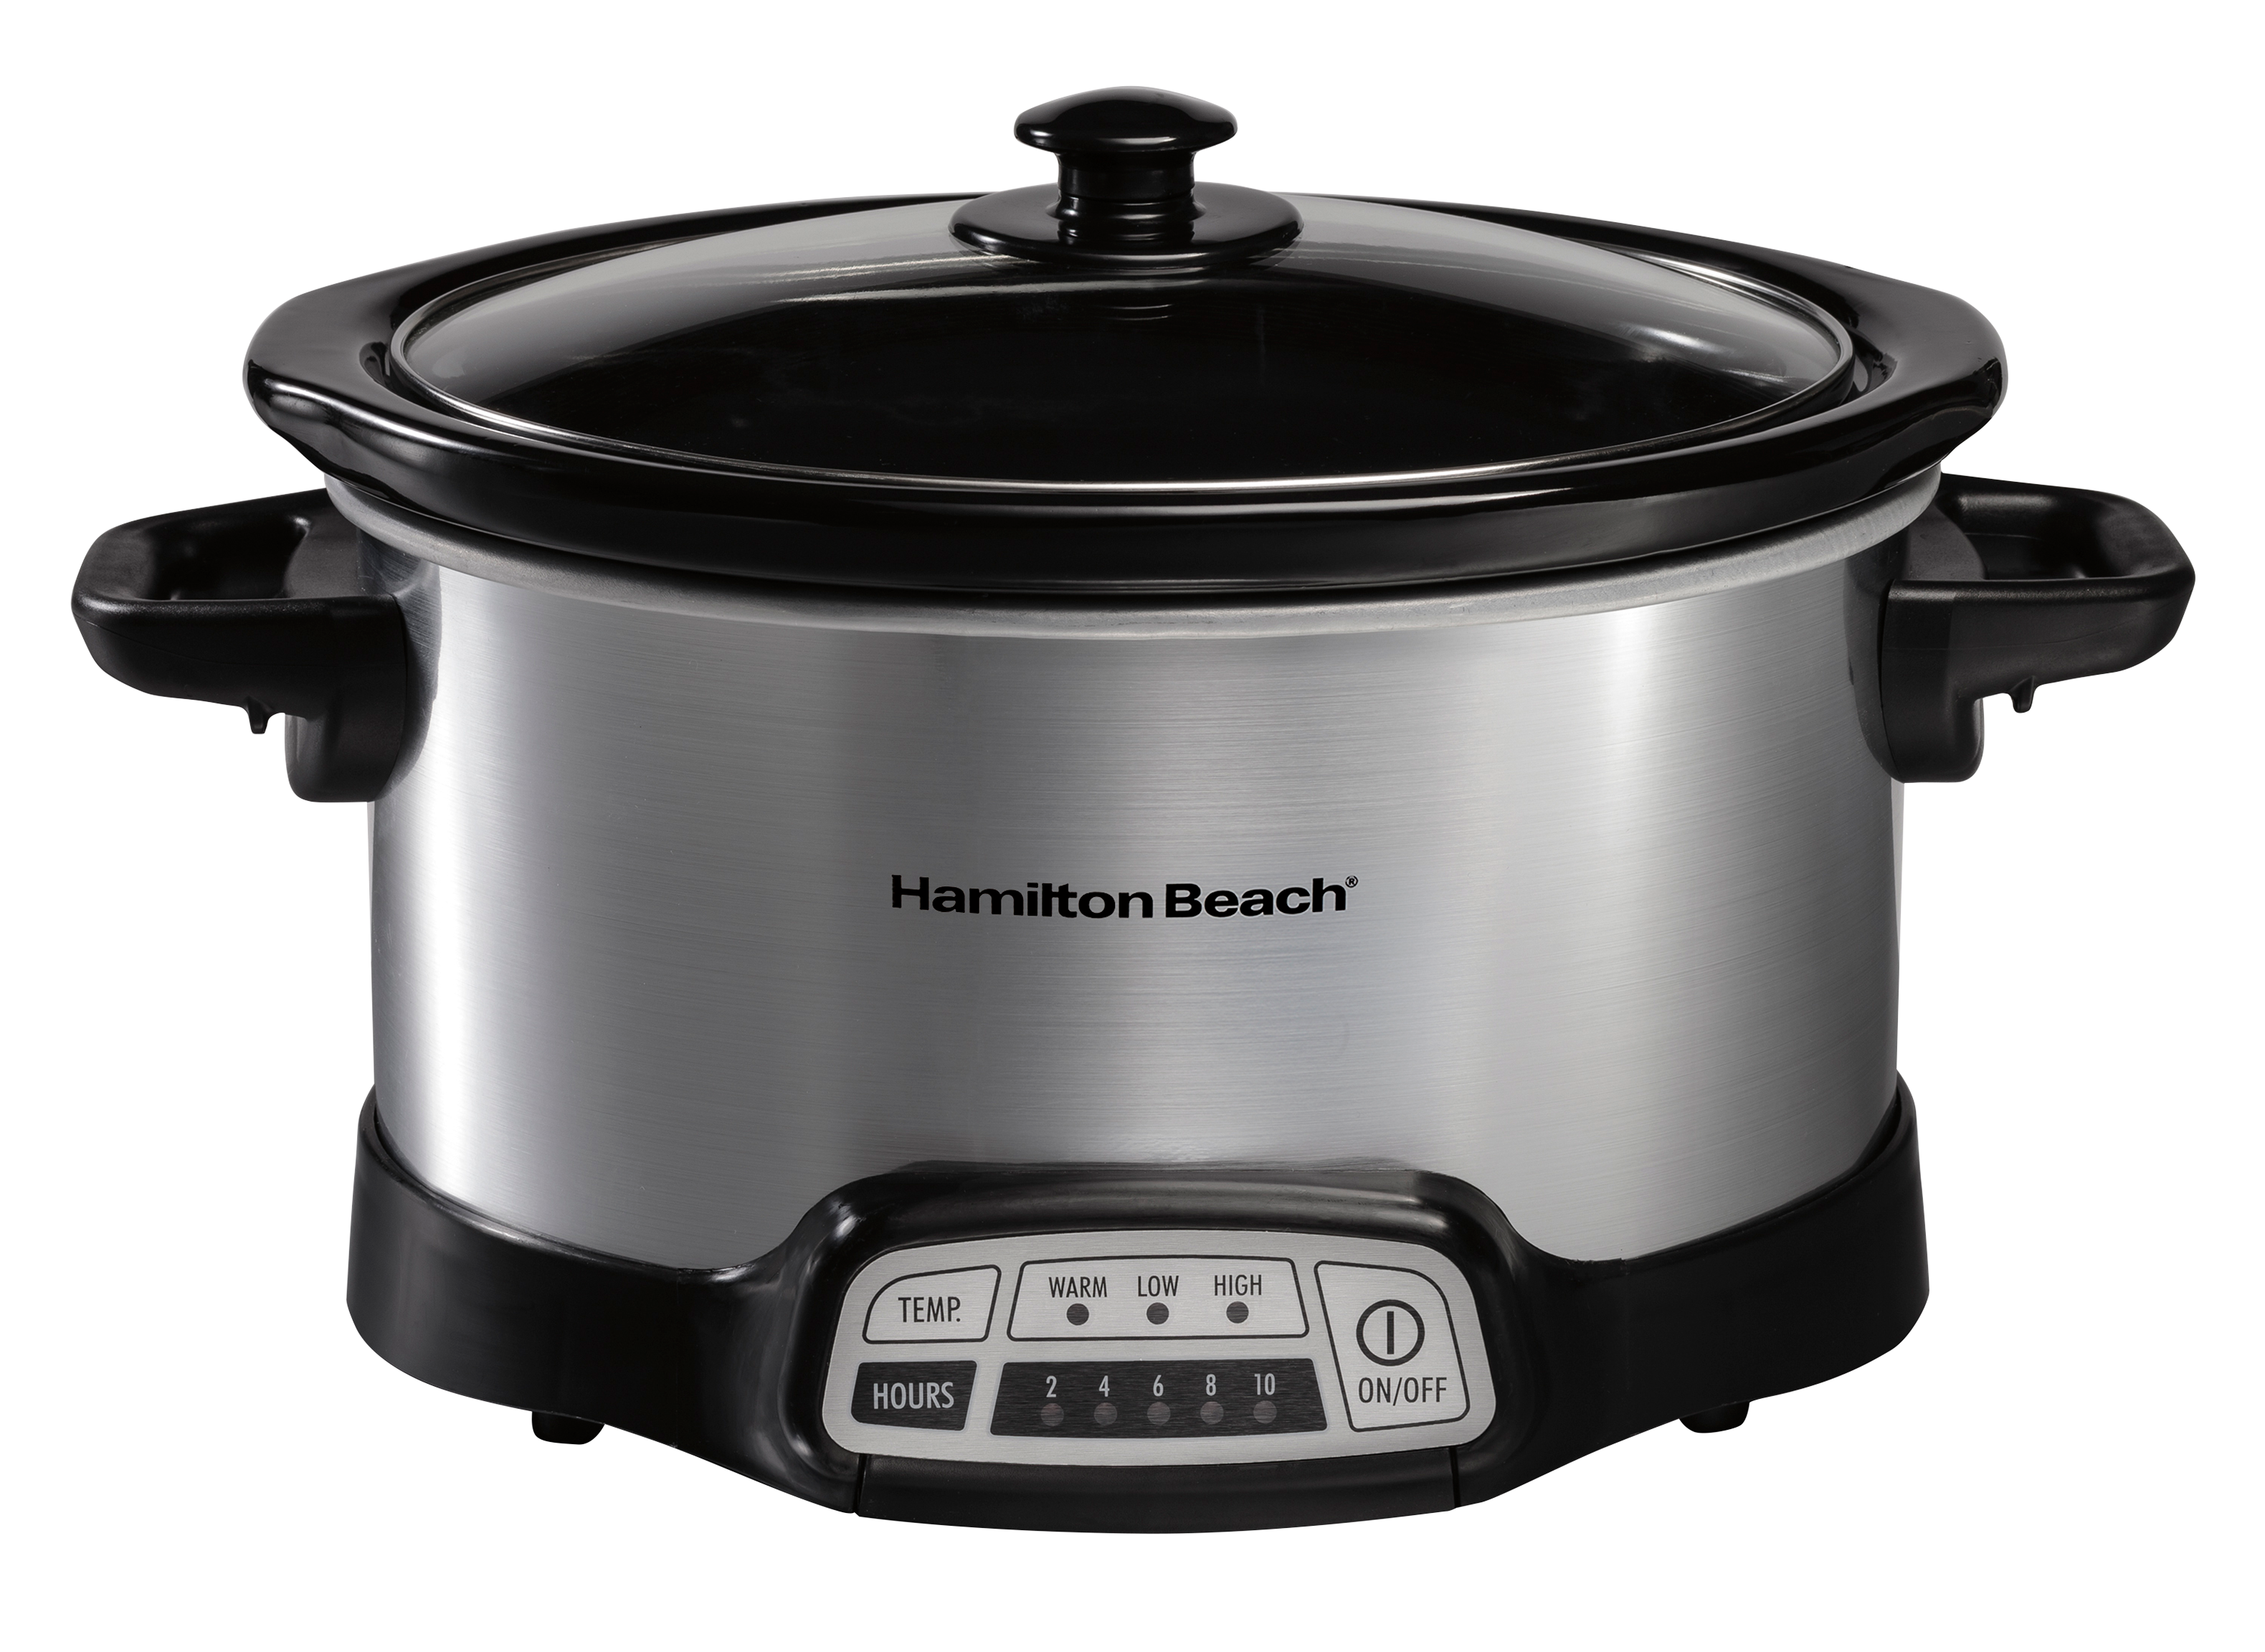 https://crdms.images.consumerreports.org/prod/products/cr/models/399578-programmable-slow-cookers-hamilton-beach-33443-electric-slow-cooker-10007932.png